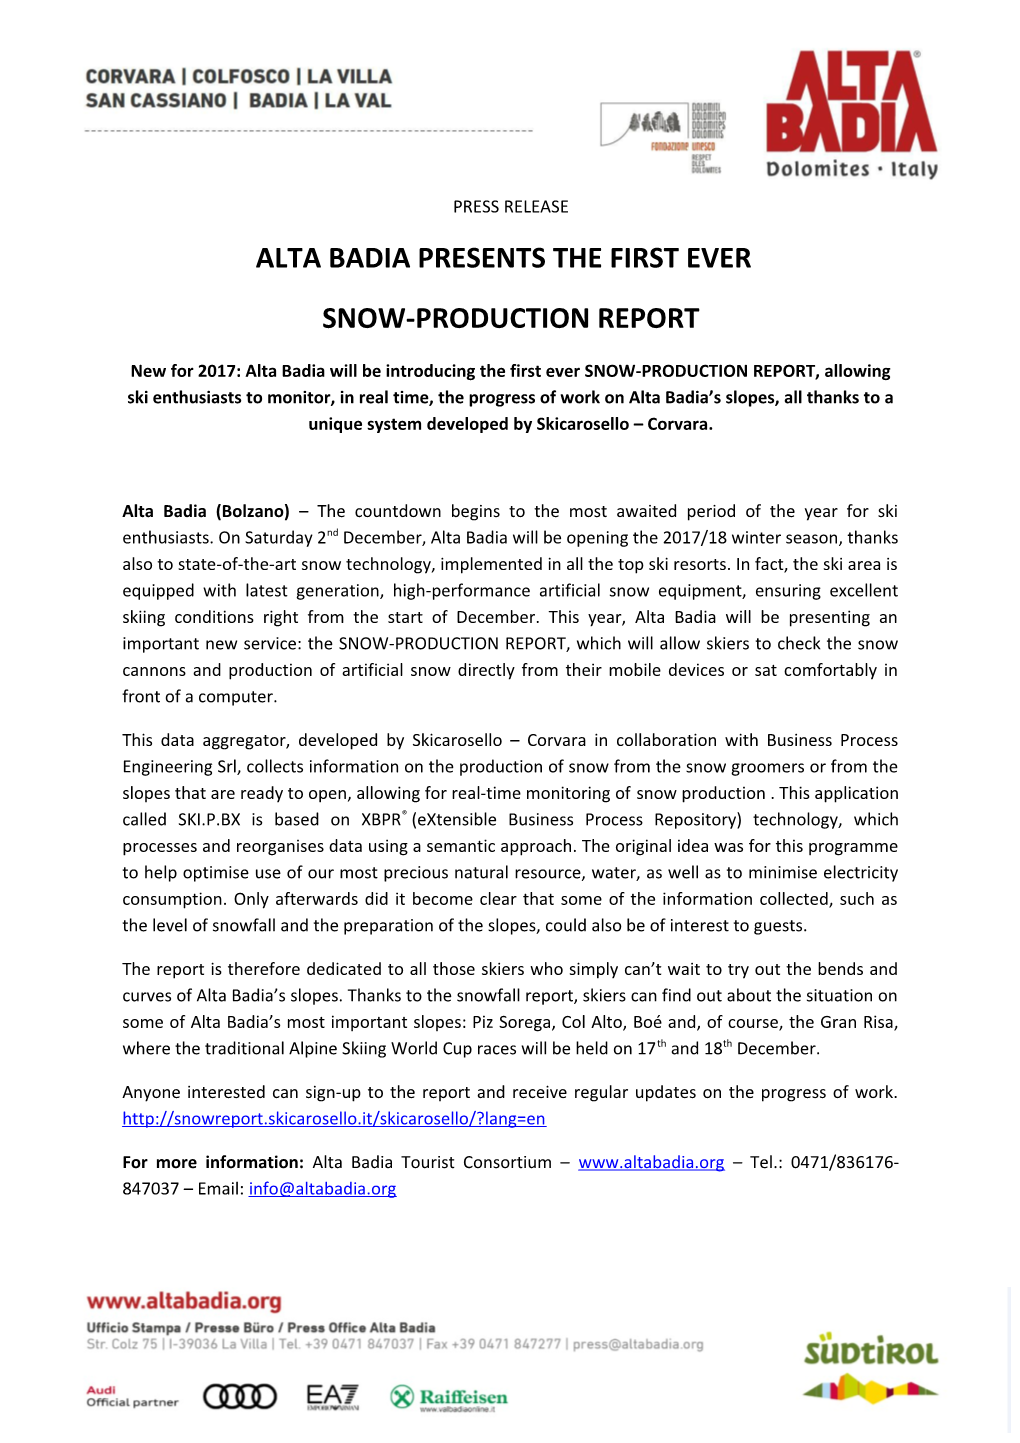 Alta Badia Presents the First Ever